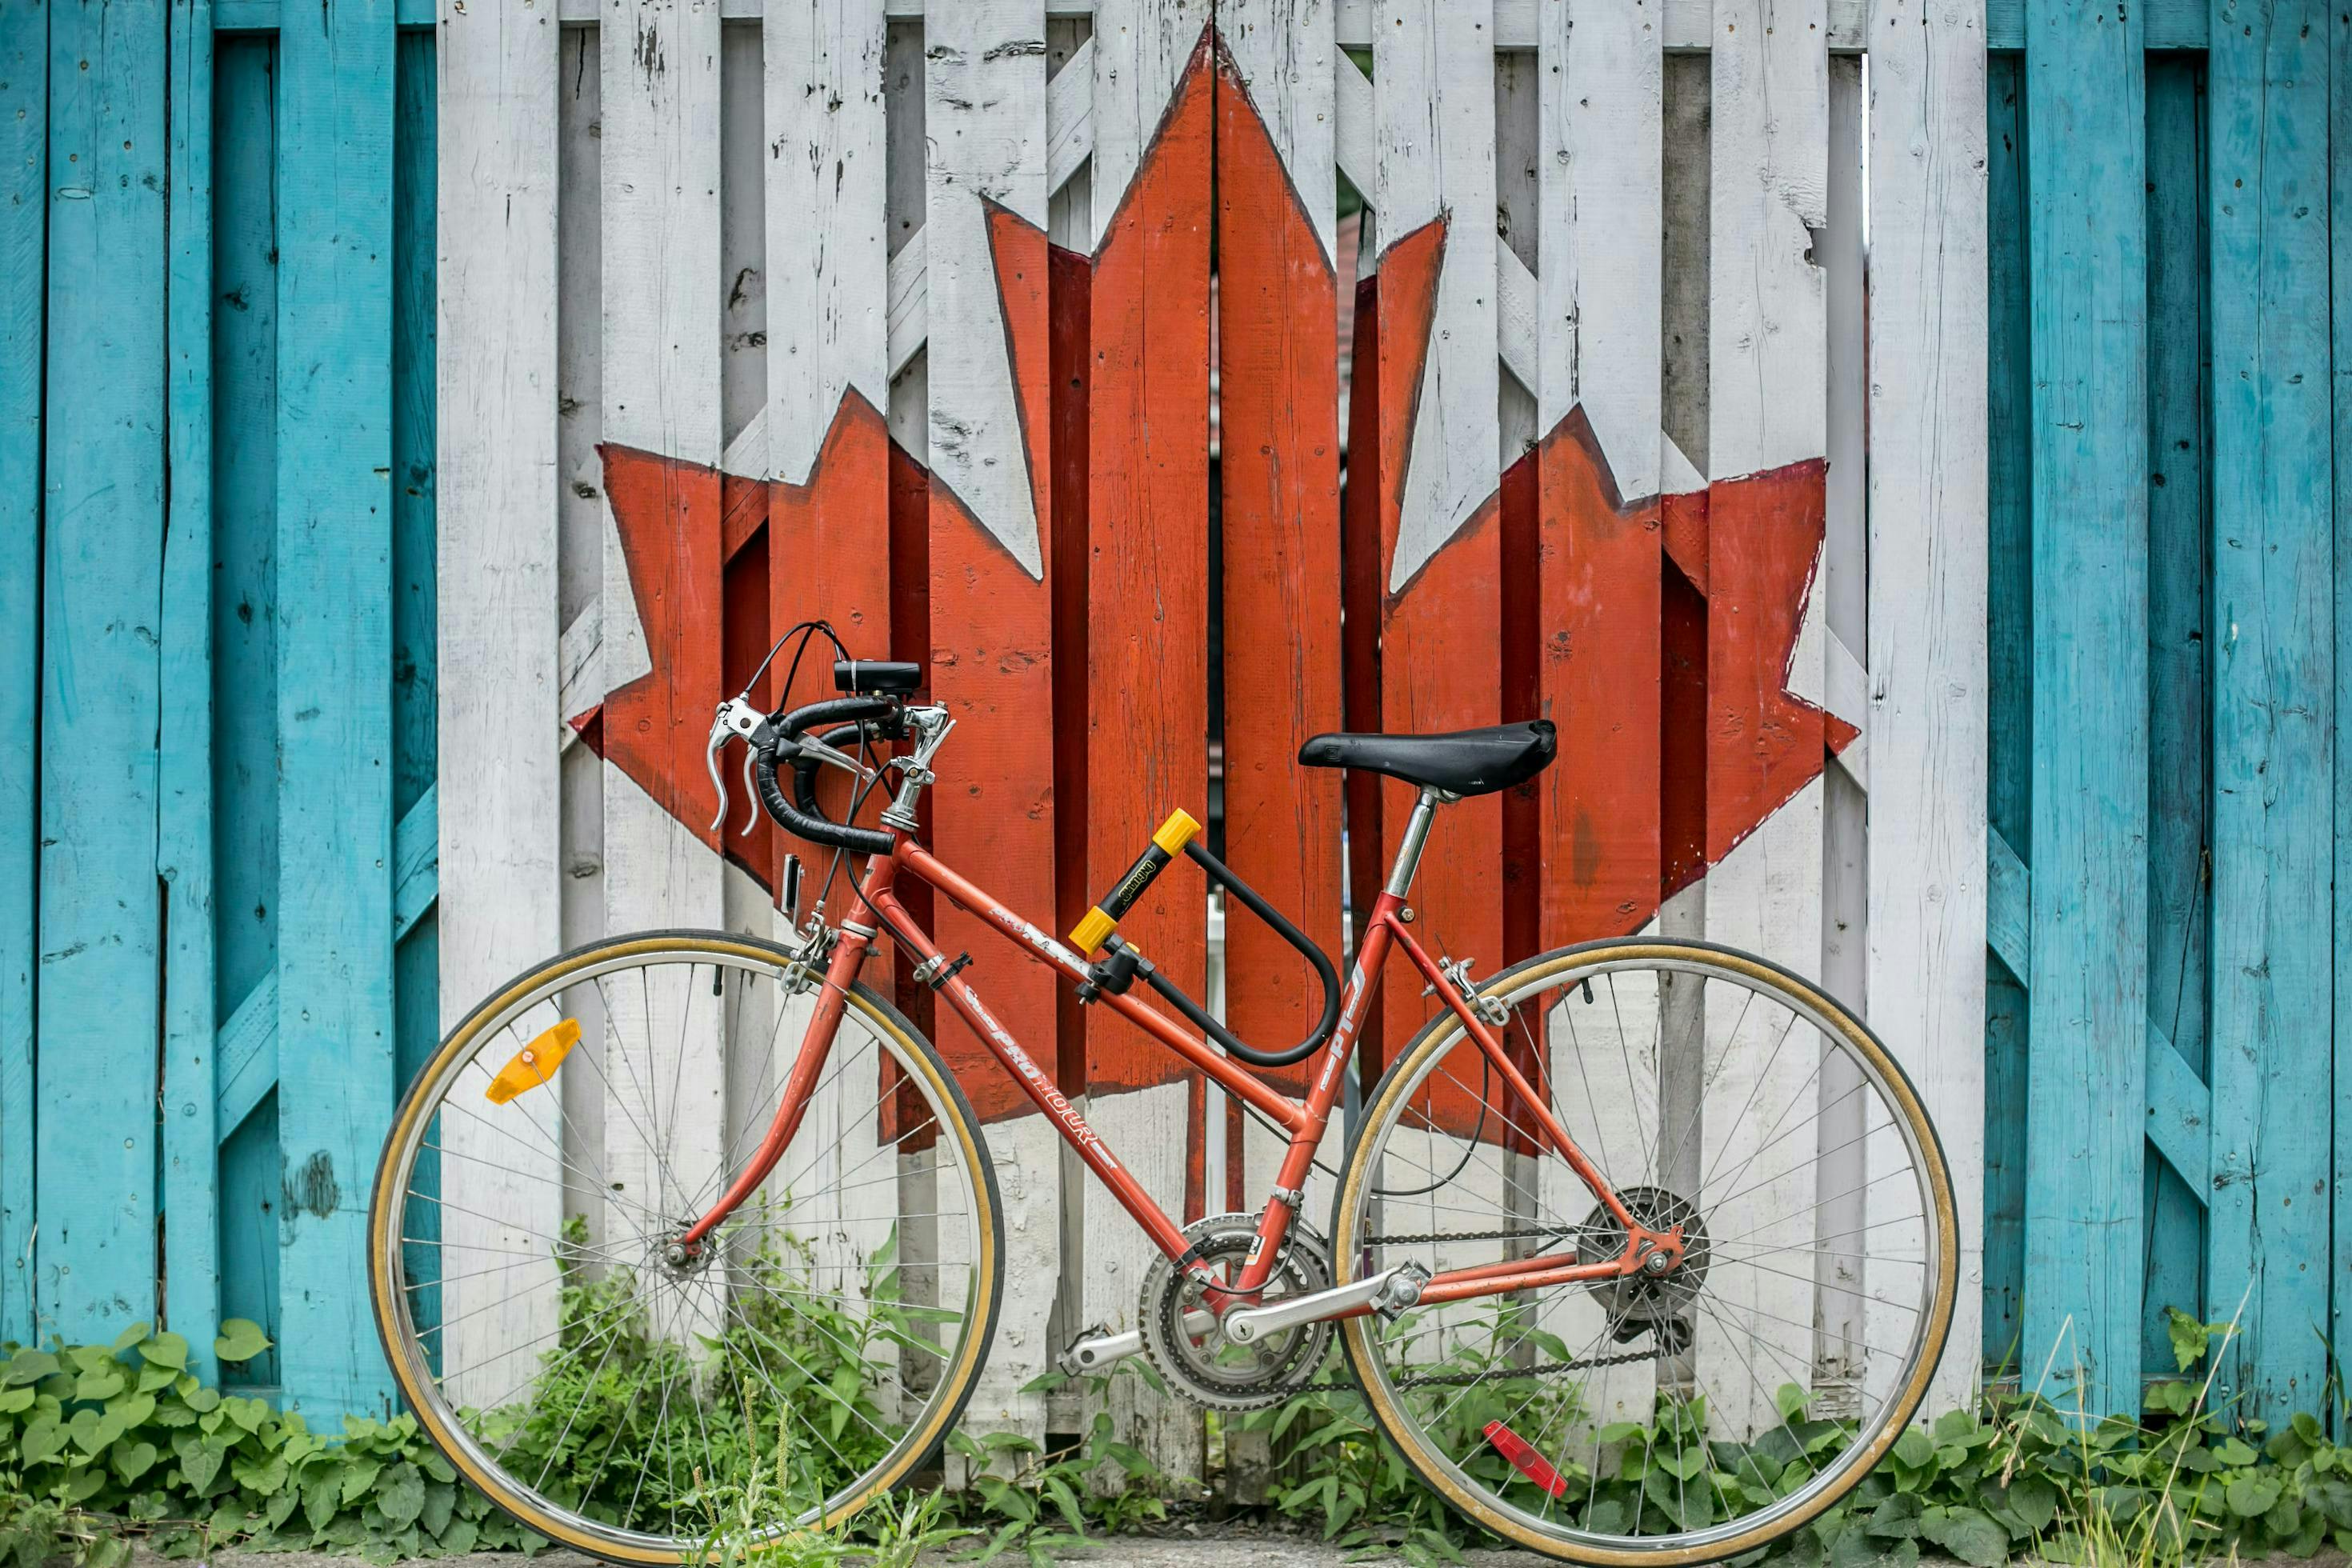 A red bicycle leans against a wooden fence painted with a large red maple leaf in the center, blue panels on the sides, and green plants at the base.